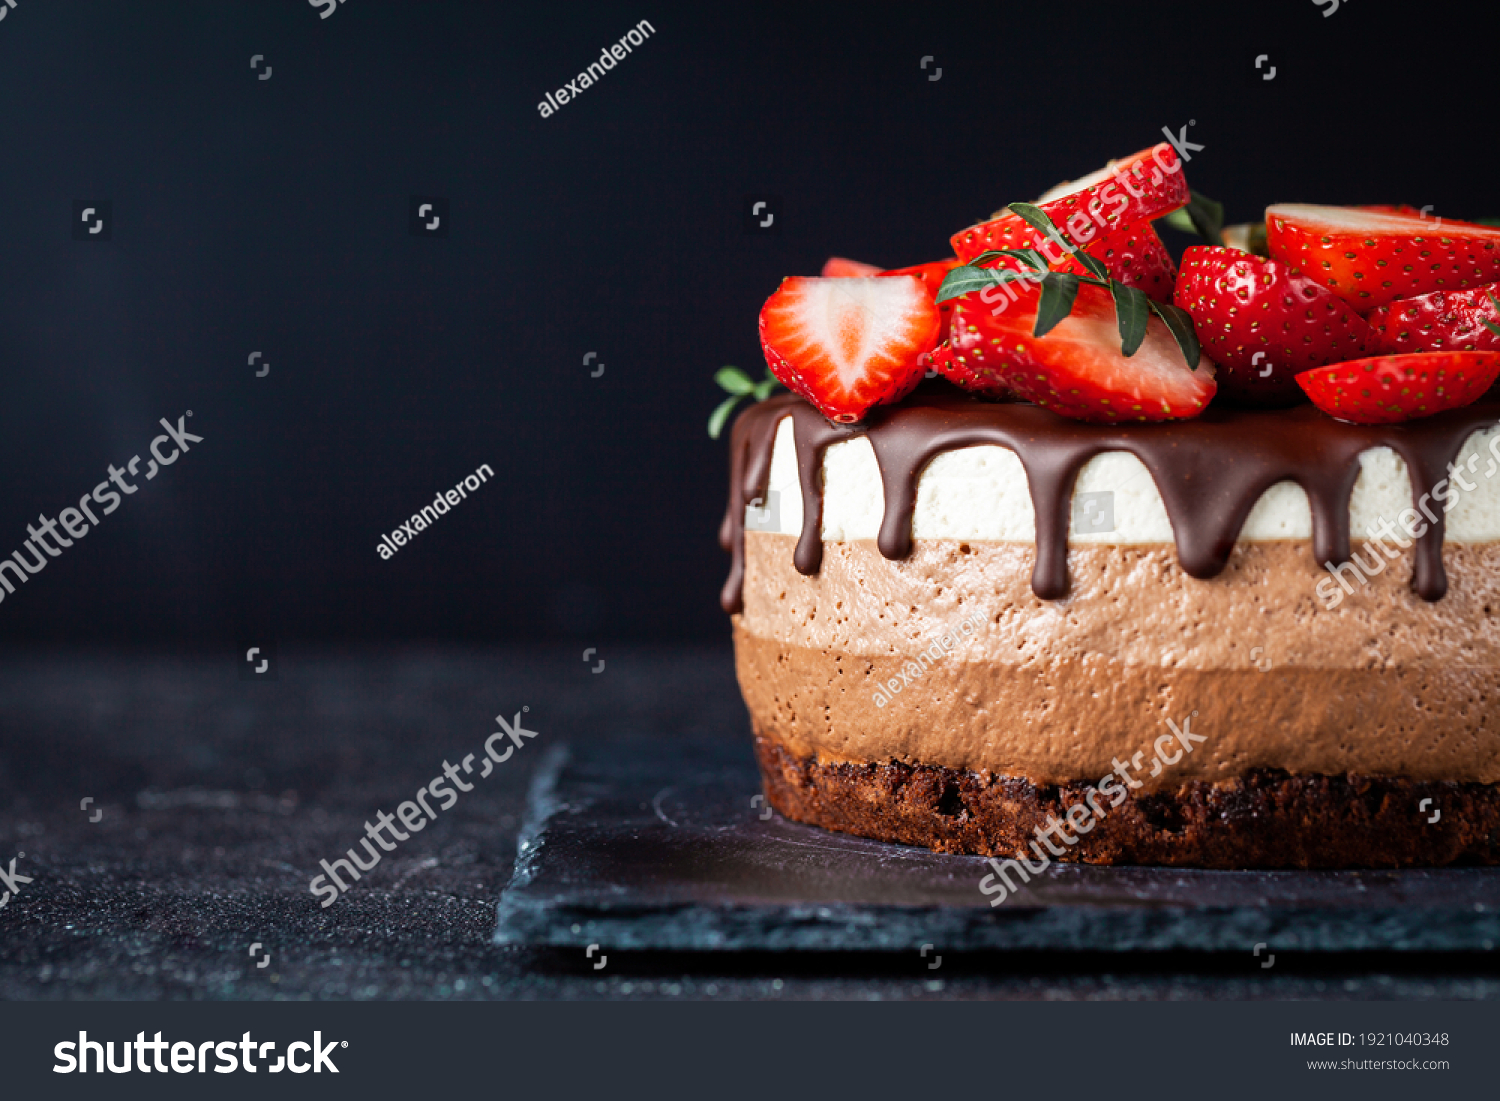 Three chocolates cake with chocolate drips on a black background. Layered cake with milk, black and white chocolate souffle decorated with strawberries on top. Confectionery background with copy space #1921040348